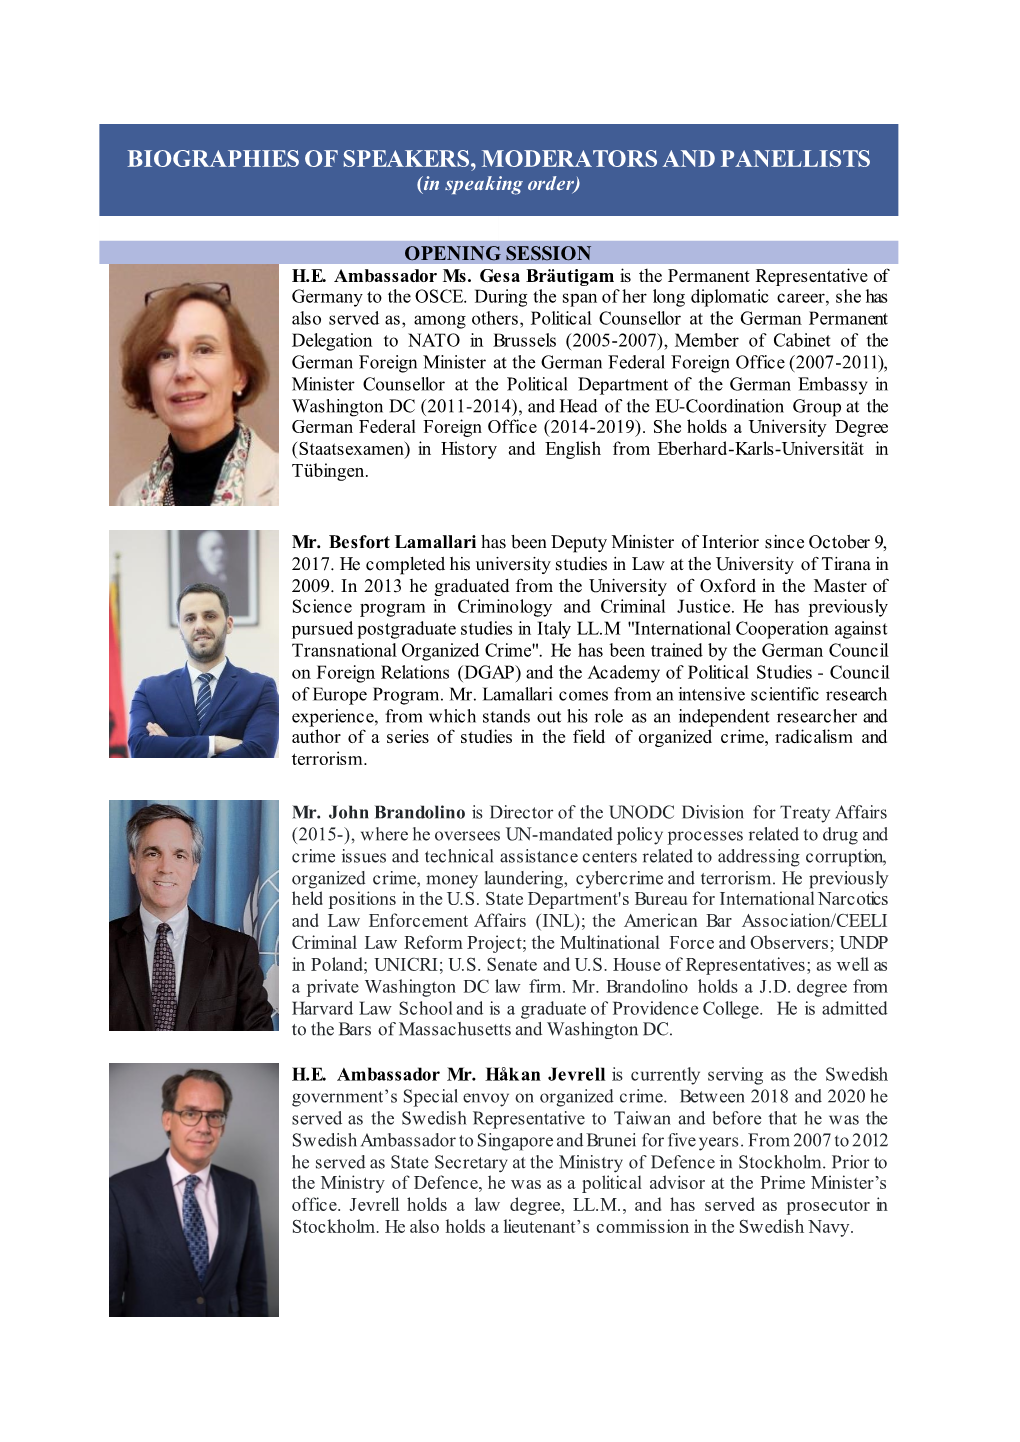 BIOGRAPHIES of SPEAKERS, MODERATORS and PANELLISTS (In Speaking Order)